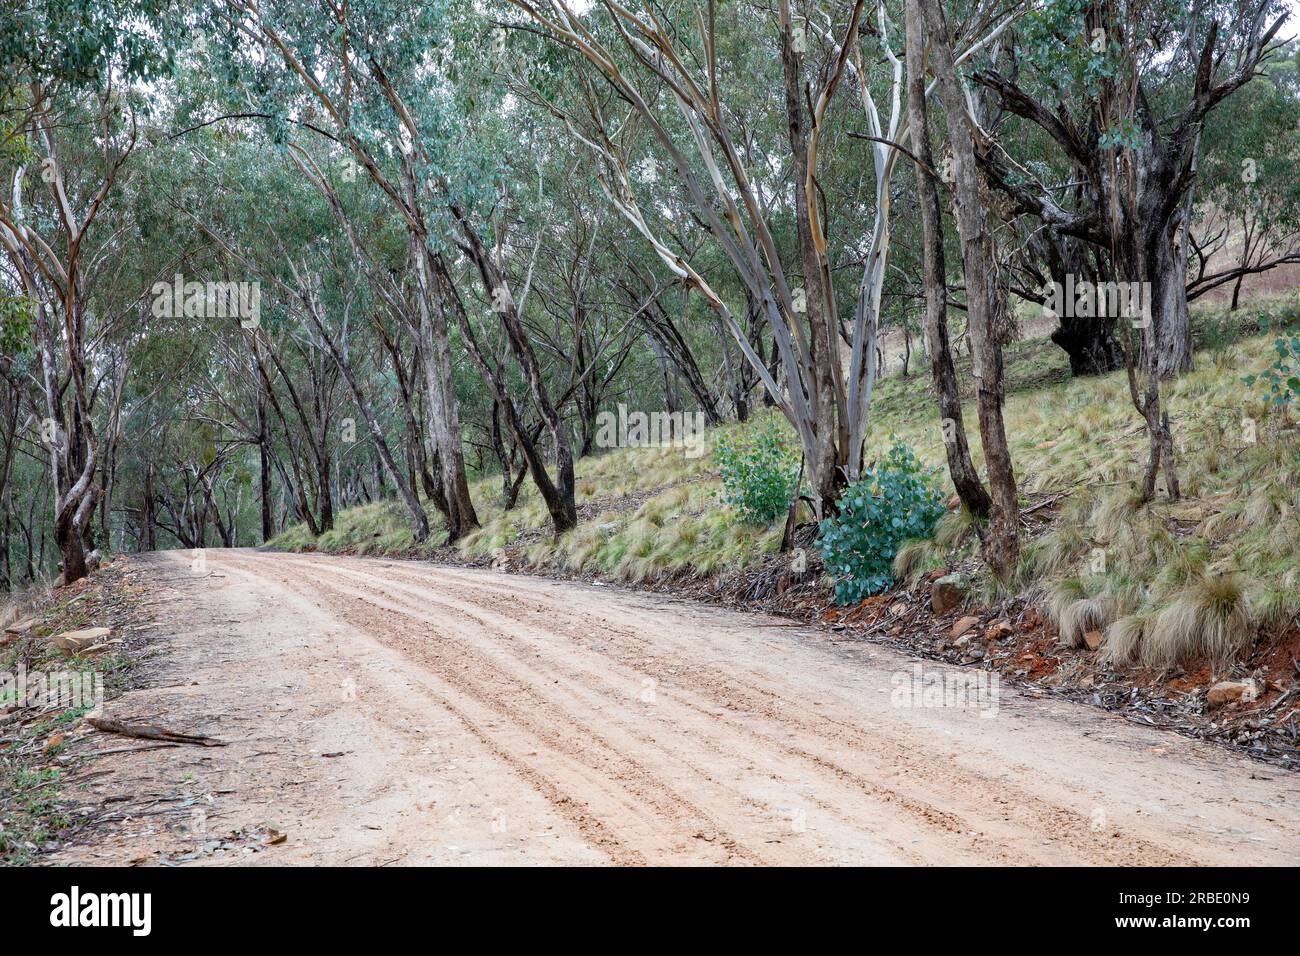 The Hill End bridle track, former walking and horse trail during the gold mining boom in central New South Wales,Australia now popular with campers Stock Photo